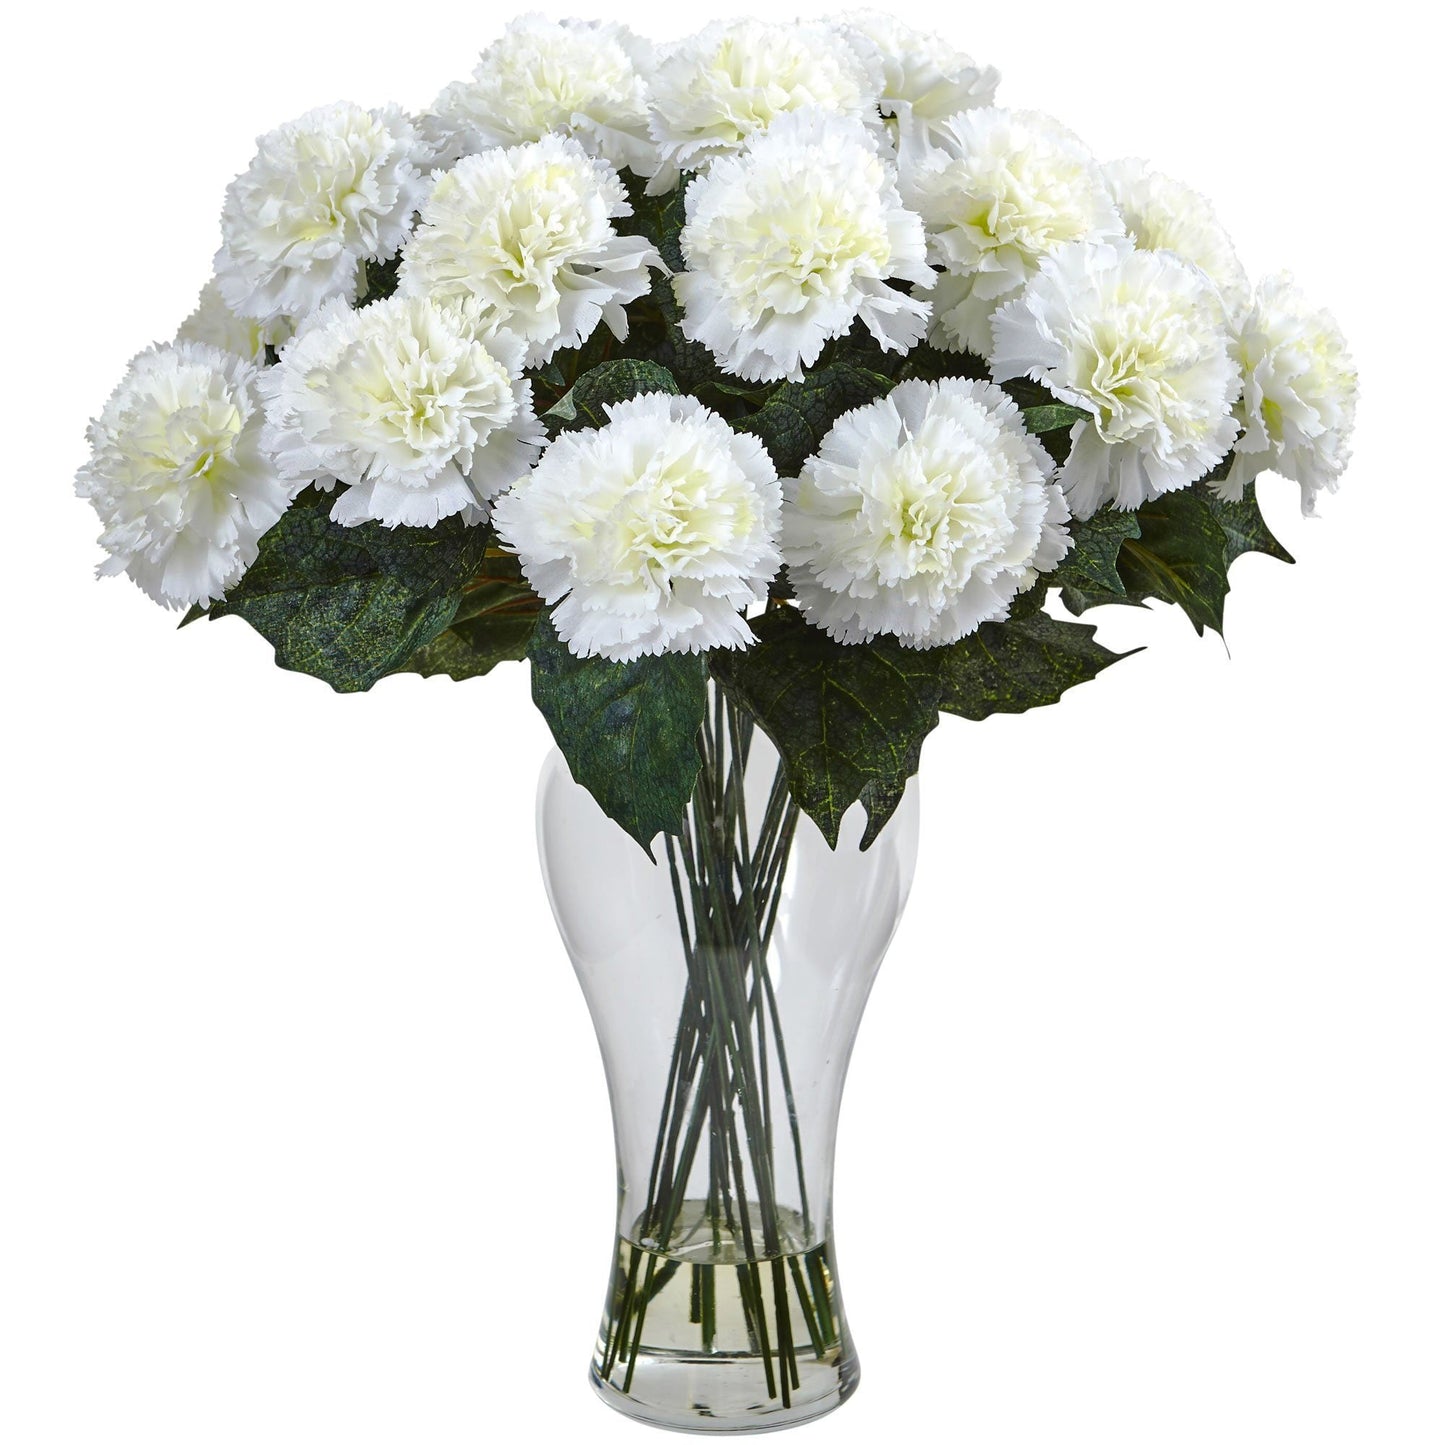 Blooming Carnation Arrangement w/Vase by Nearly Natural